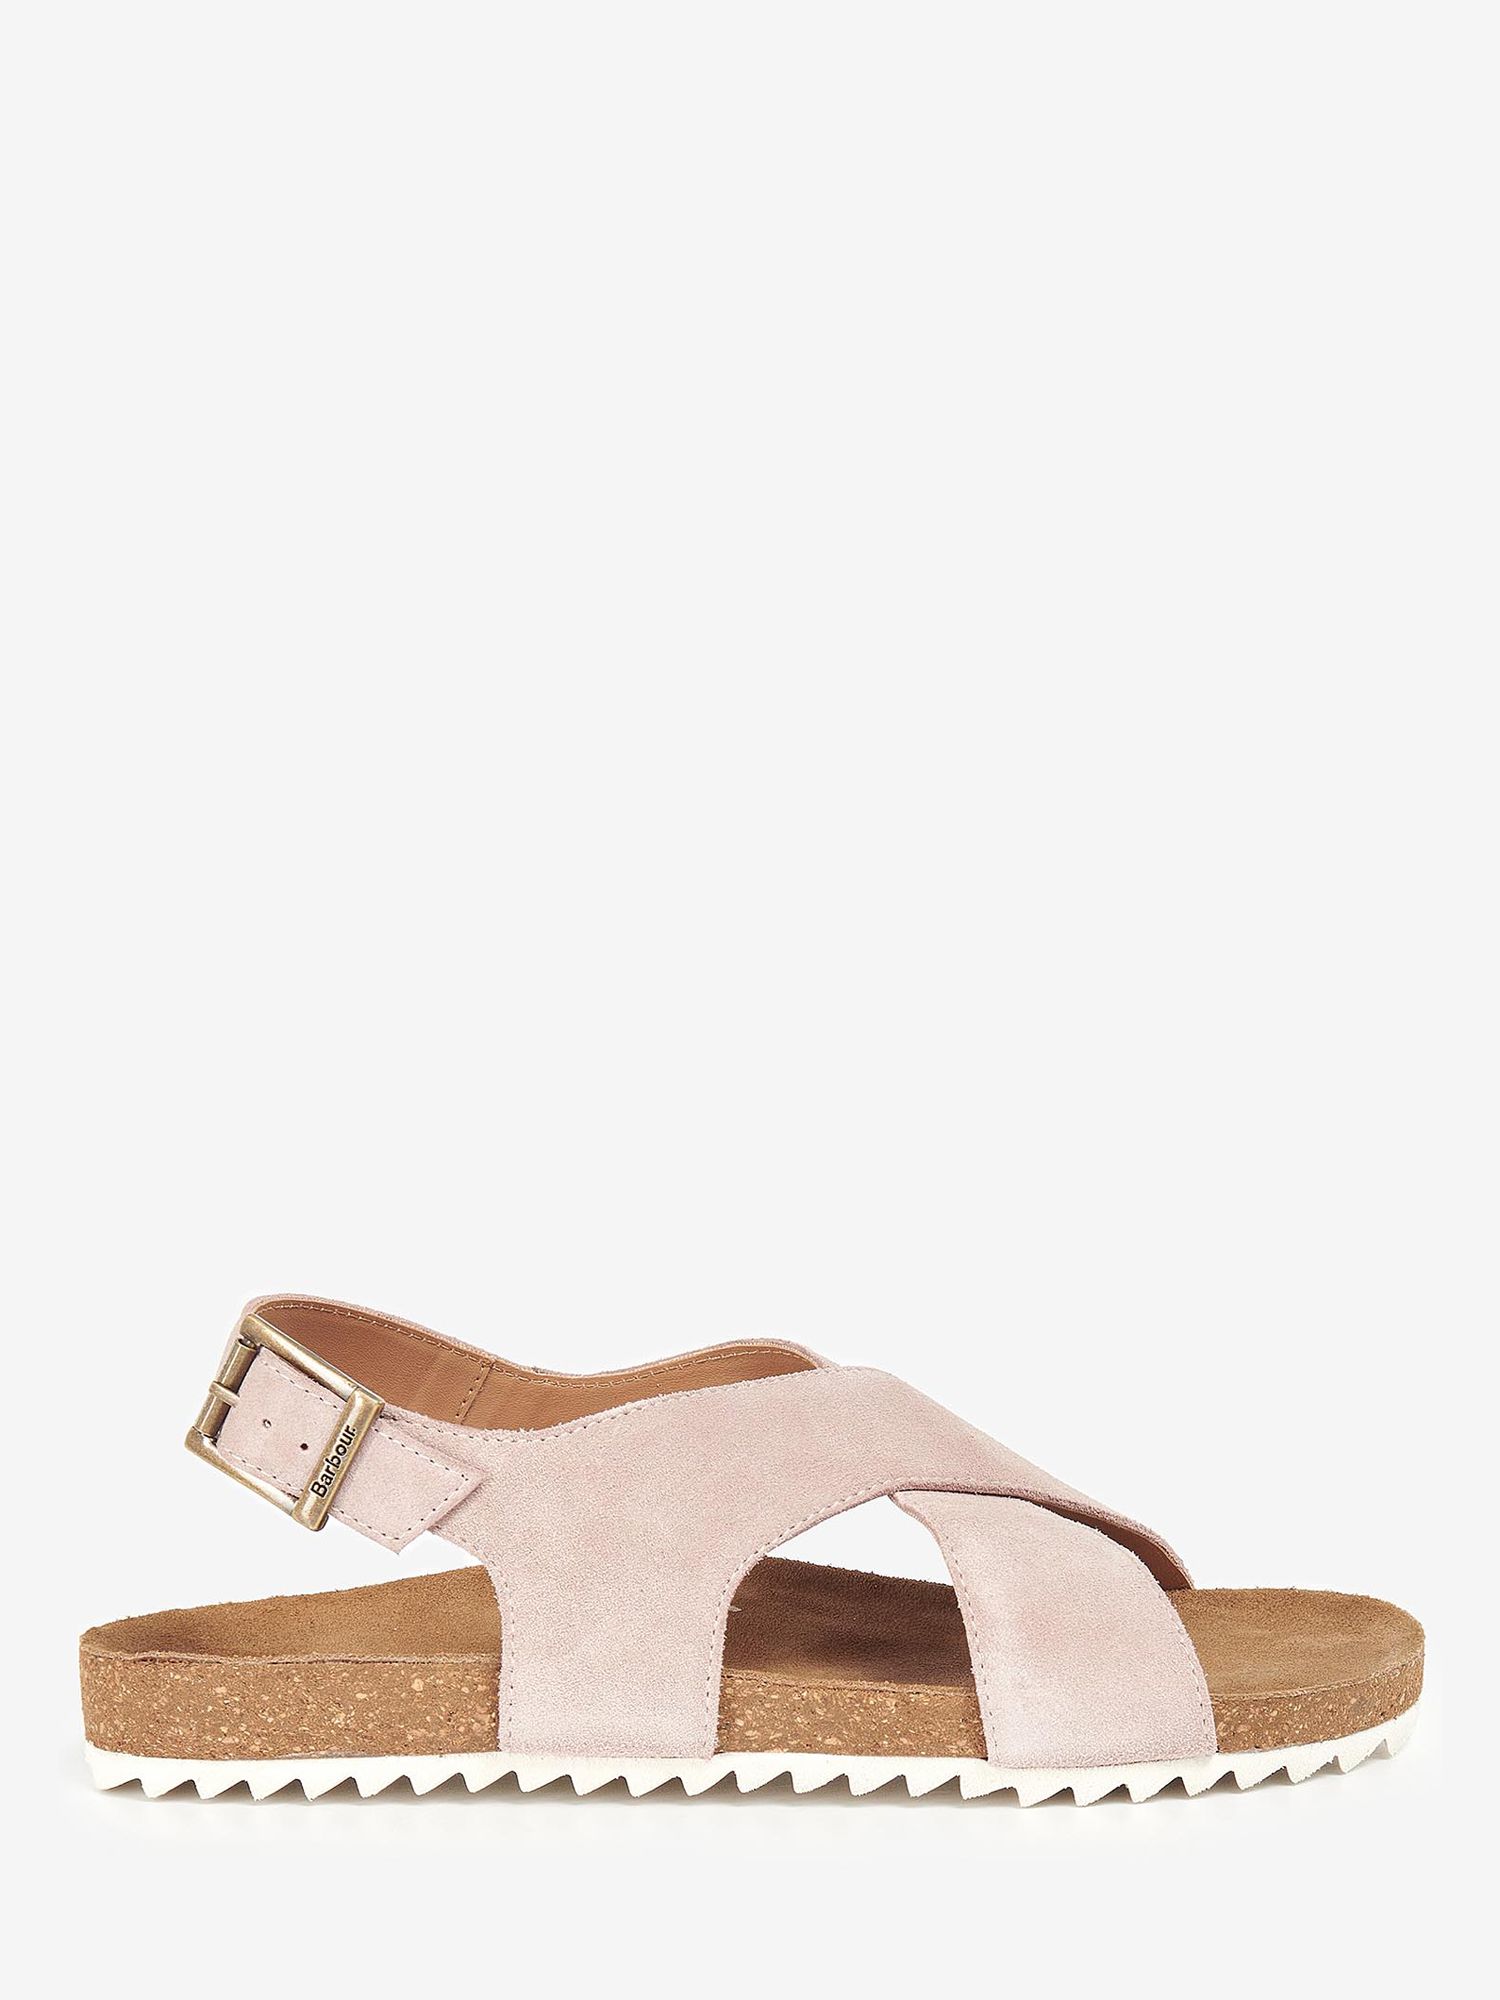 Barbour Rochelle Suede Cross Strap Sandals, Pink at John Lewis & Partners